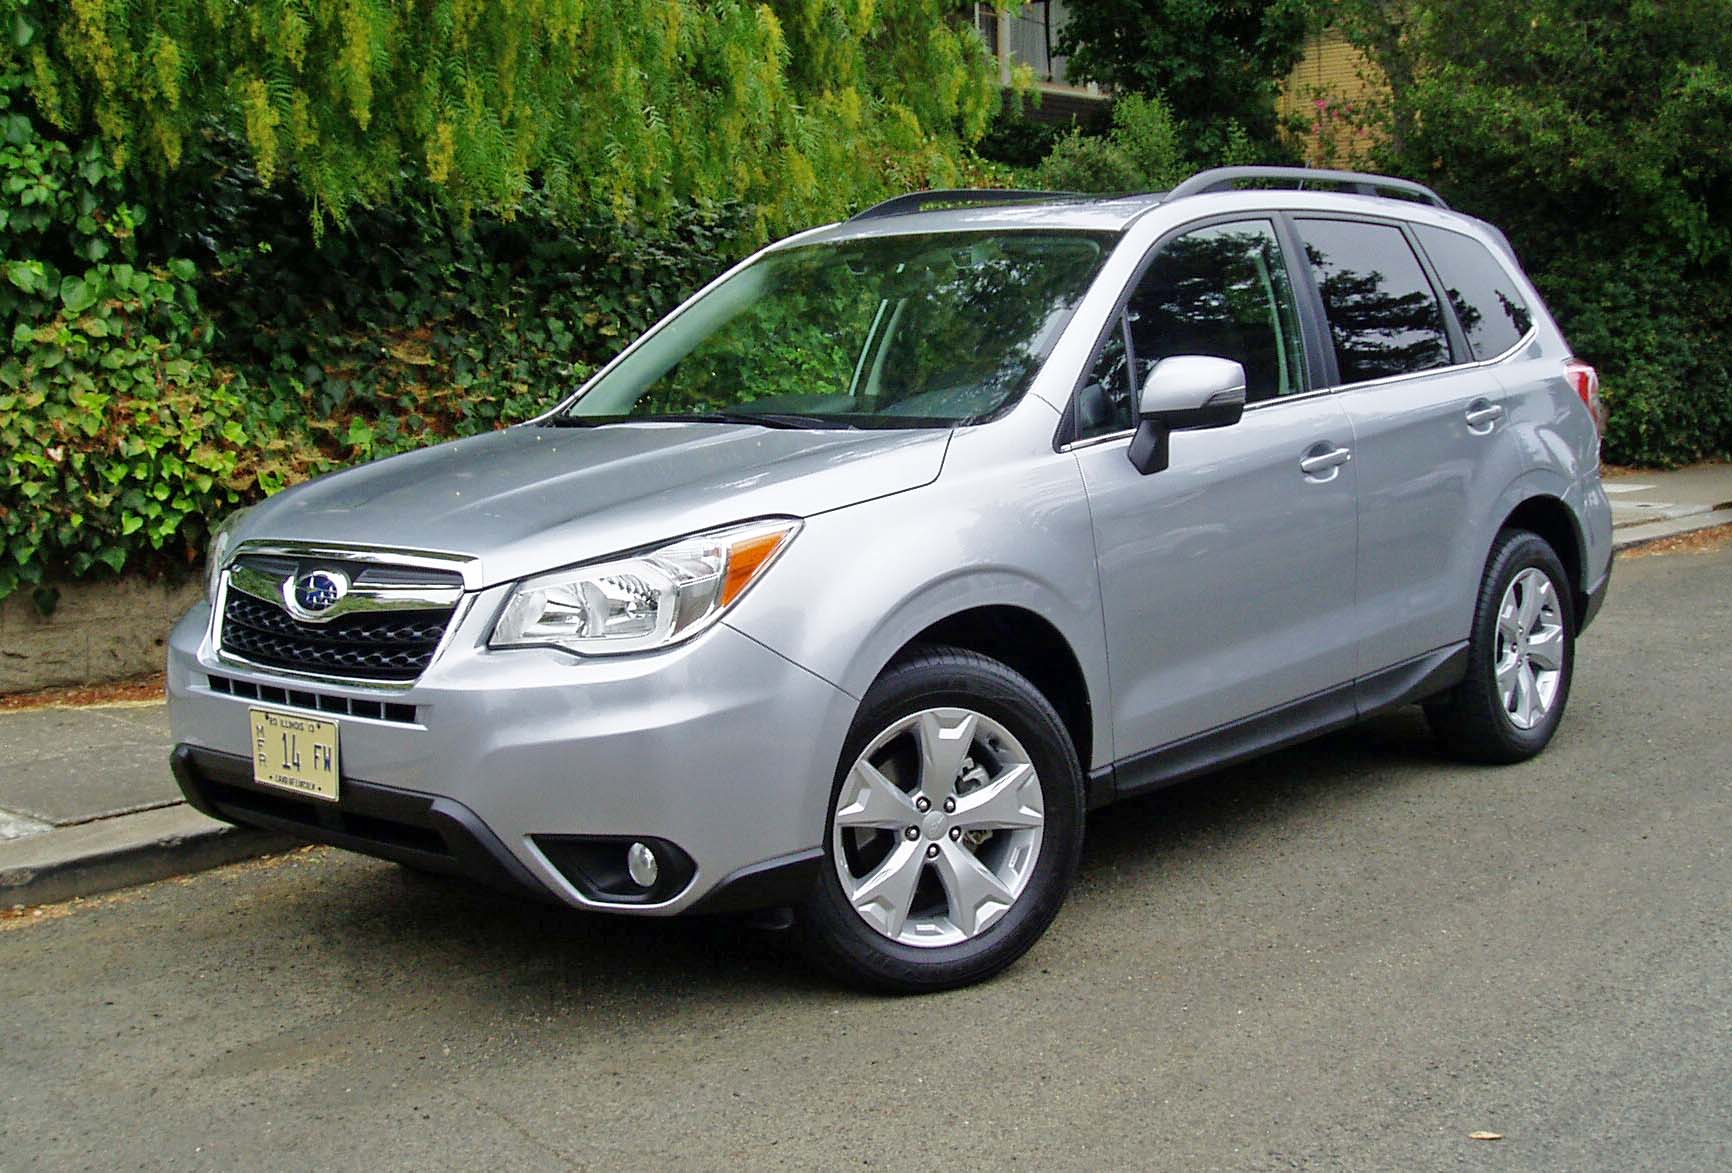 2014 Subaru Forester 2.5i Touring Test Drive | Our Auto Expert